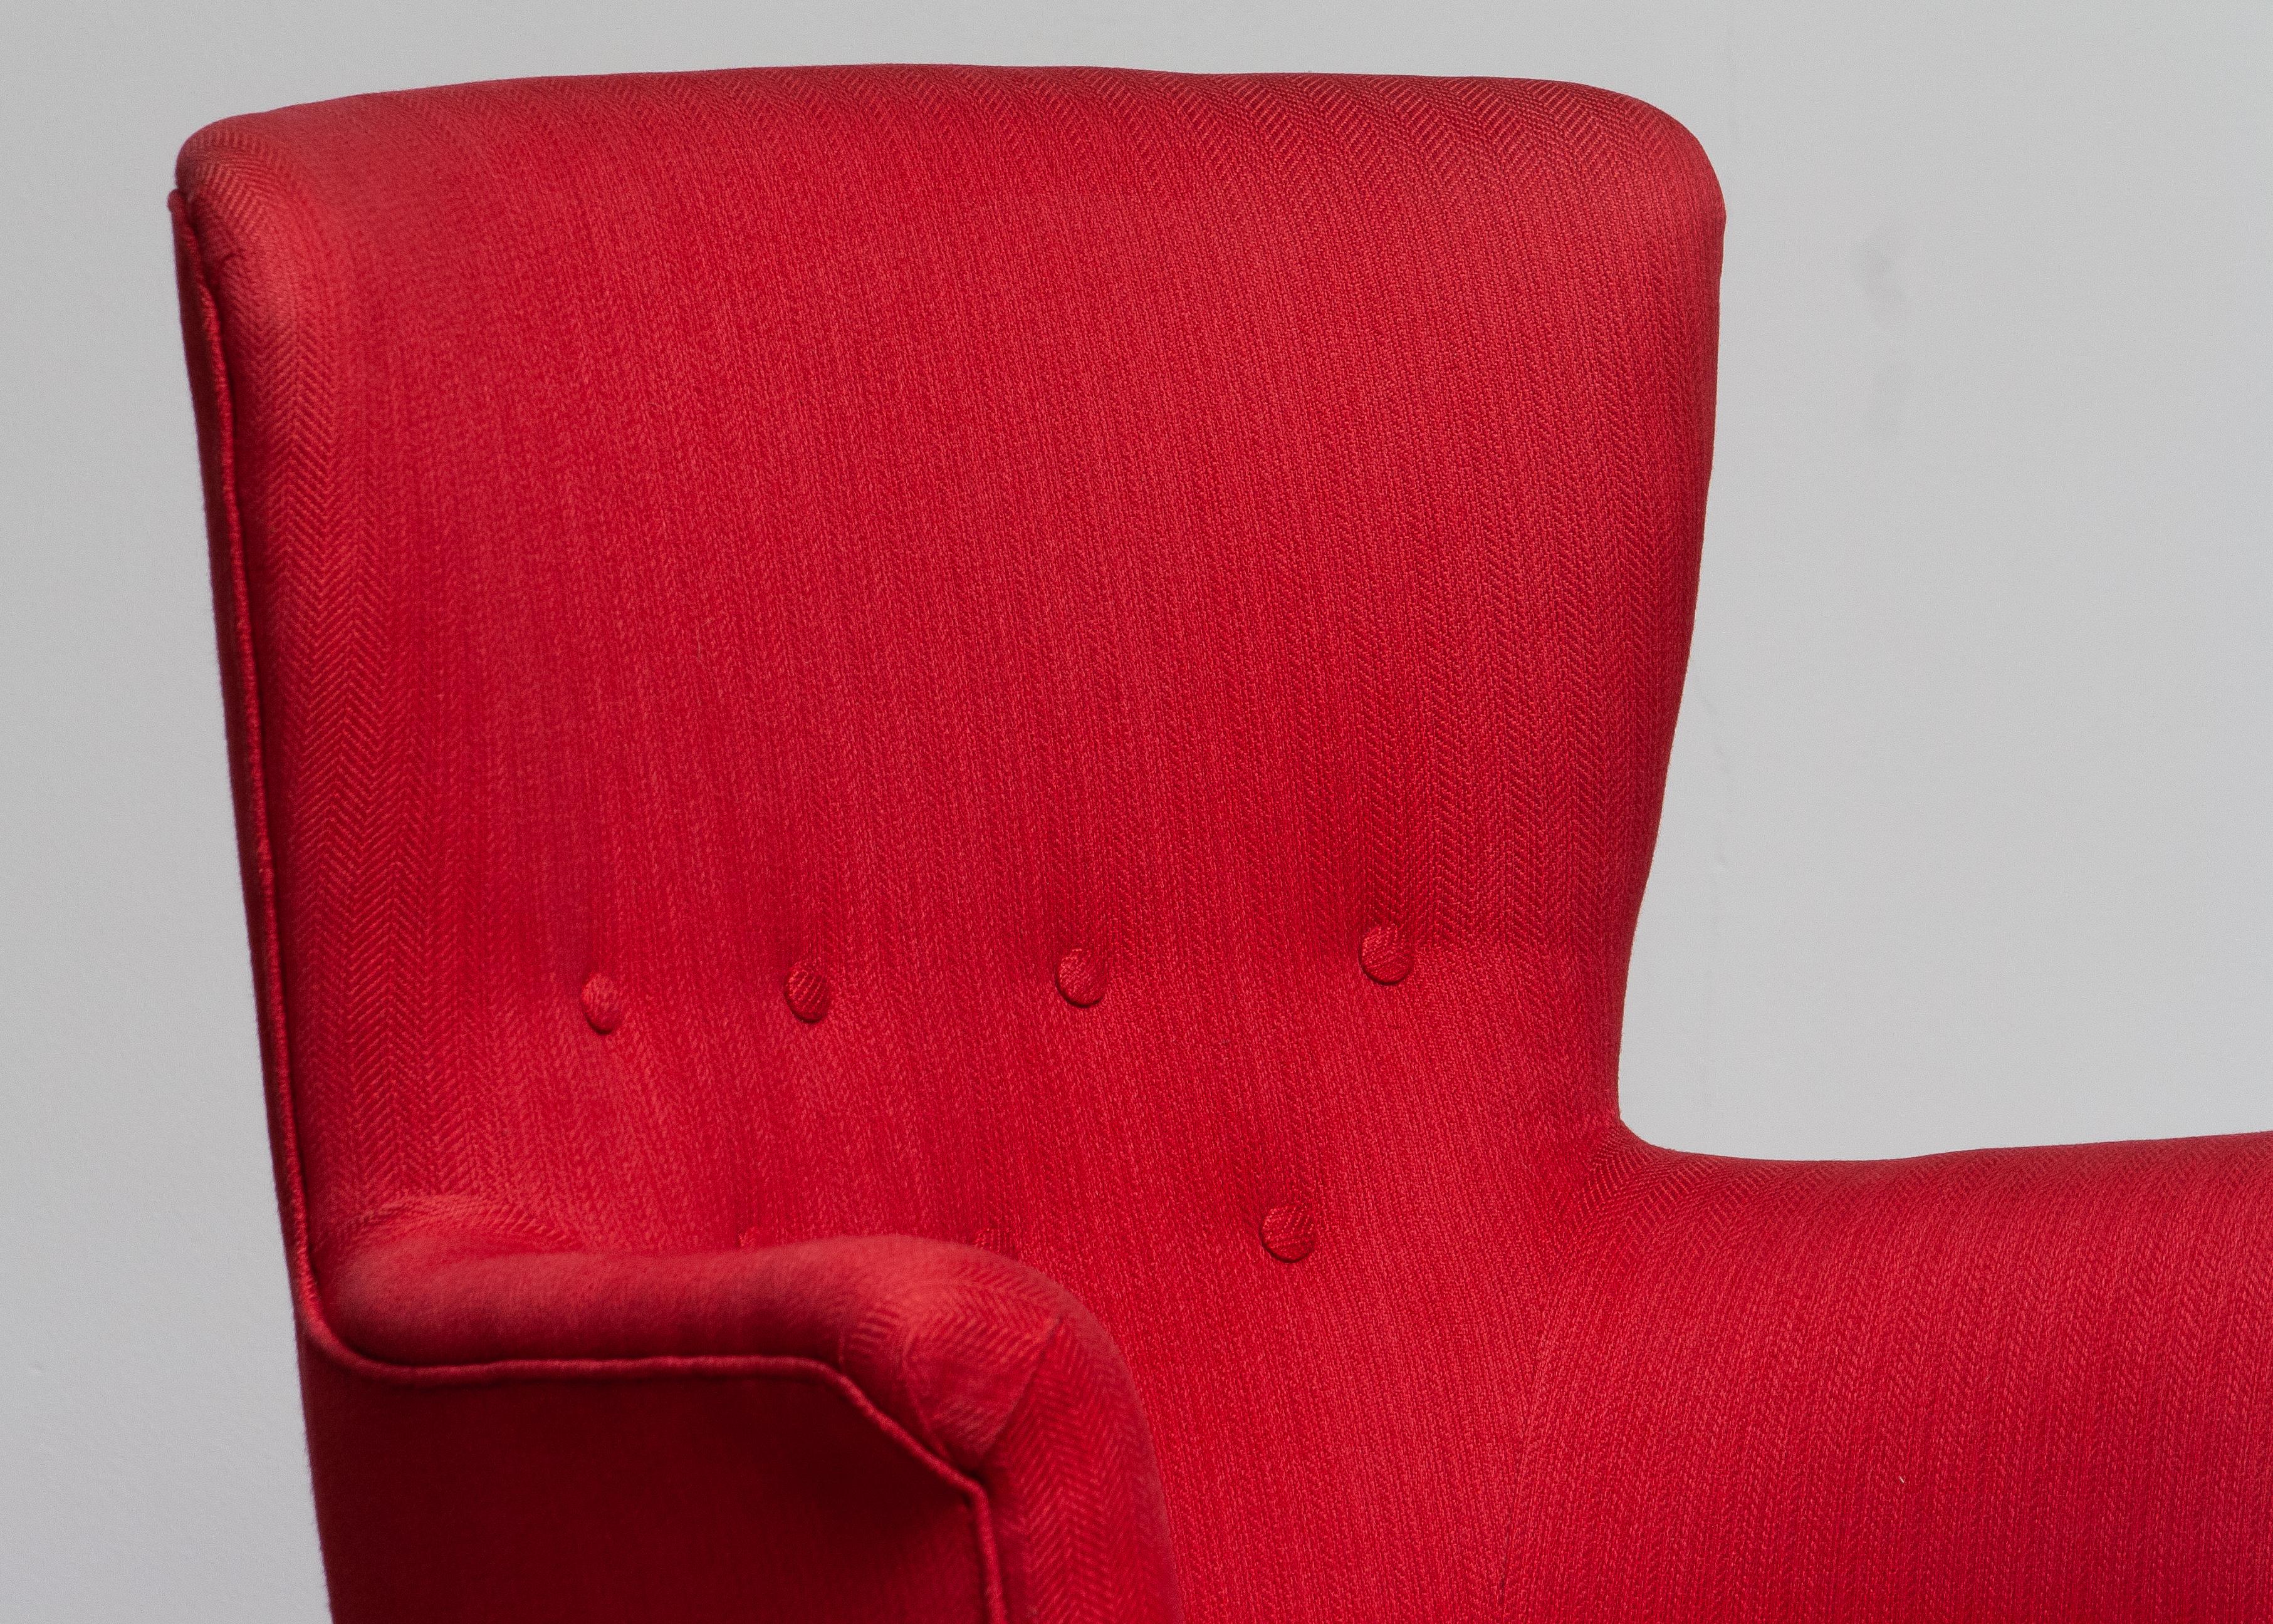 Beautiful fuchsia / red easy / lounge chair designed by Carl Malmsten for OH Sjogren, Sweden.
The overall condition is good
Period: 1940-1949.
Note that we have two in our gallery!